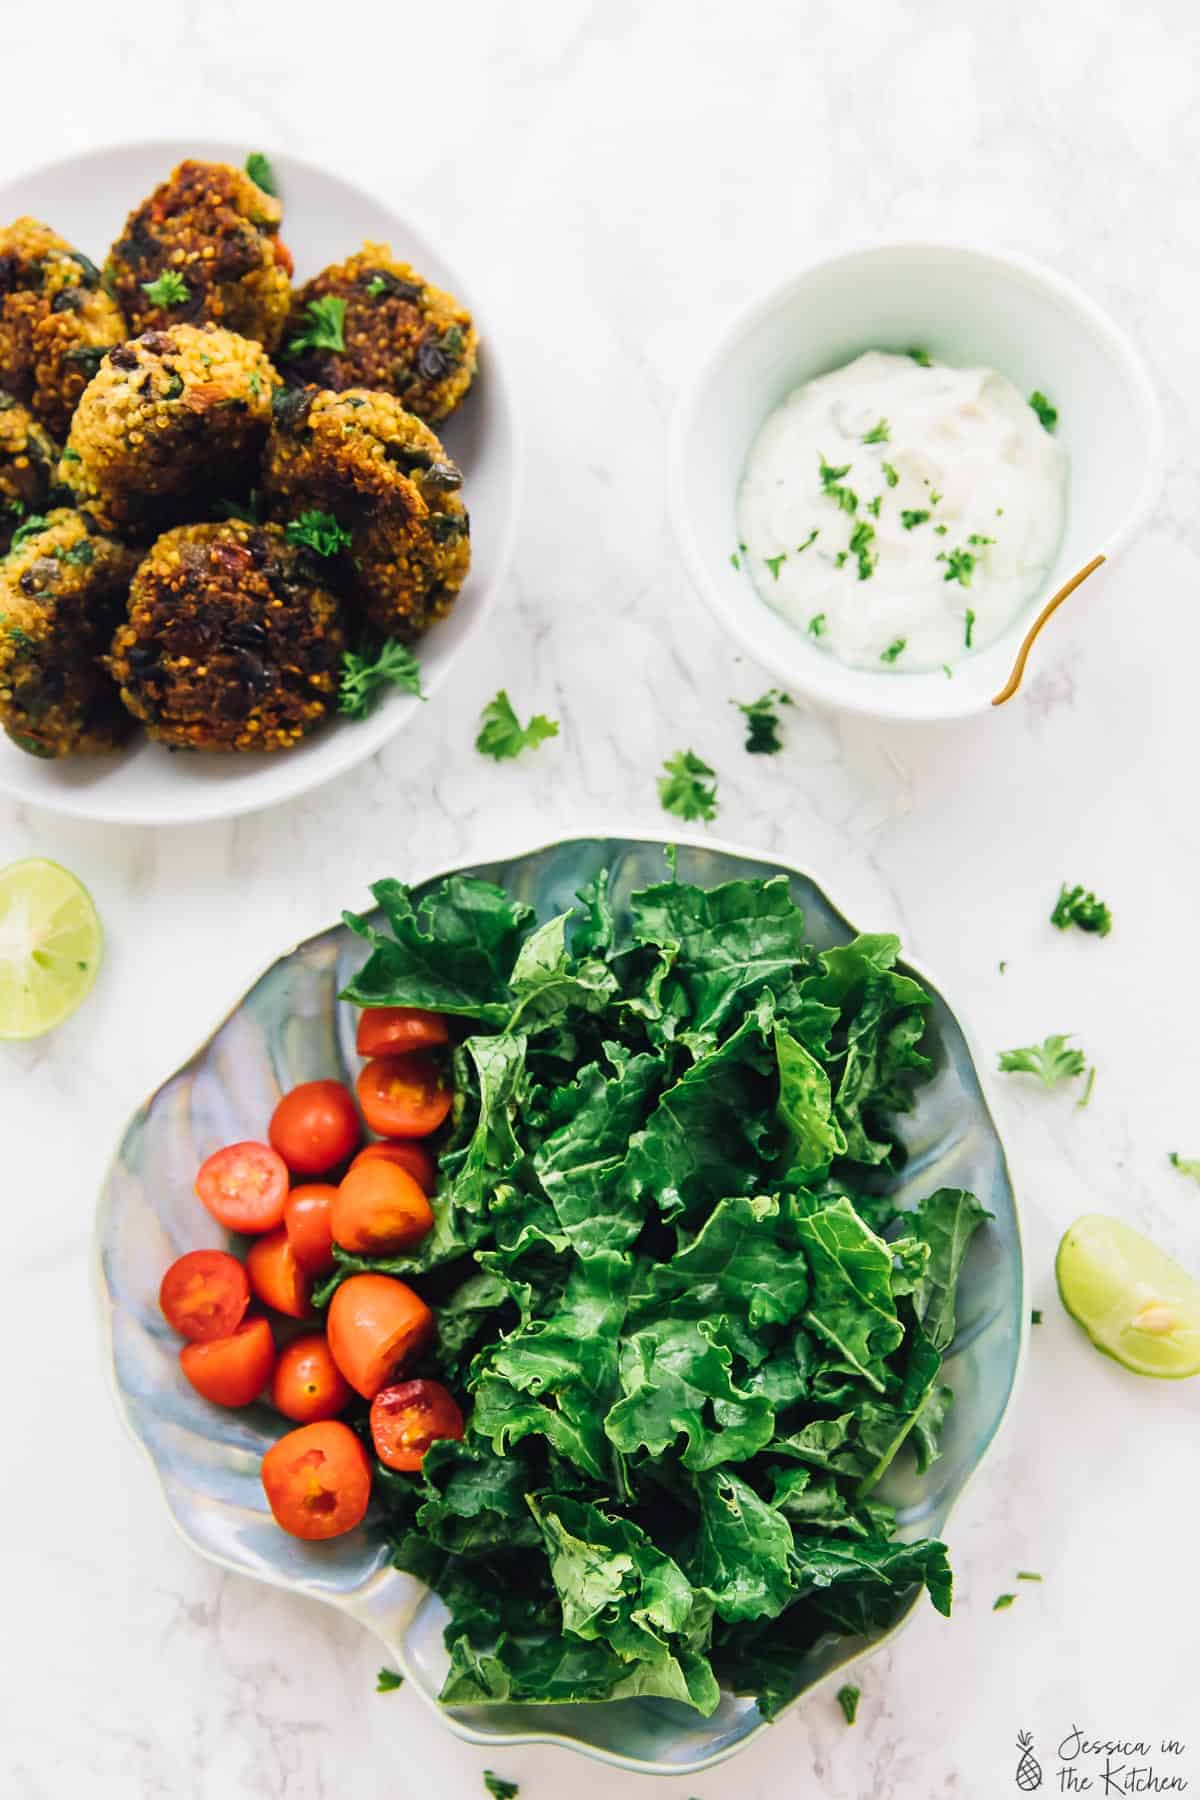 Overhead view of bowl of quinoa patties, bowl of tahini yogurt sauce, and plate of greens and tomatoes